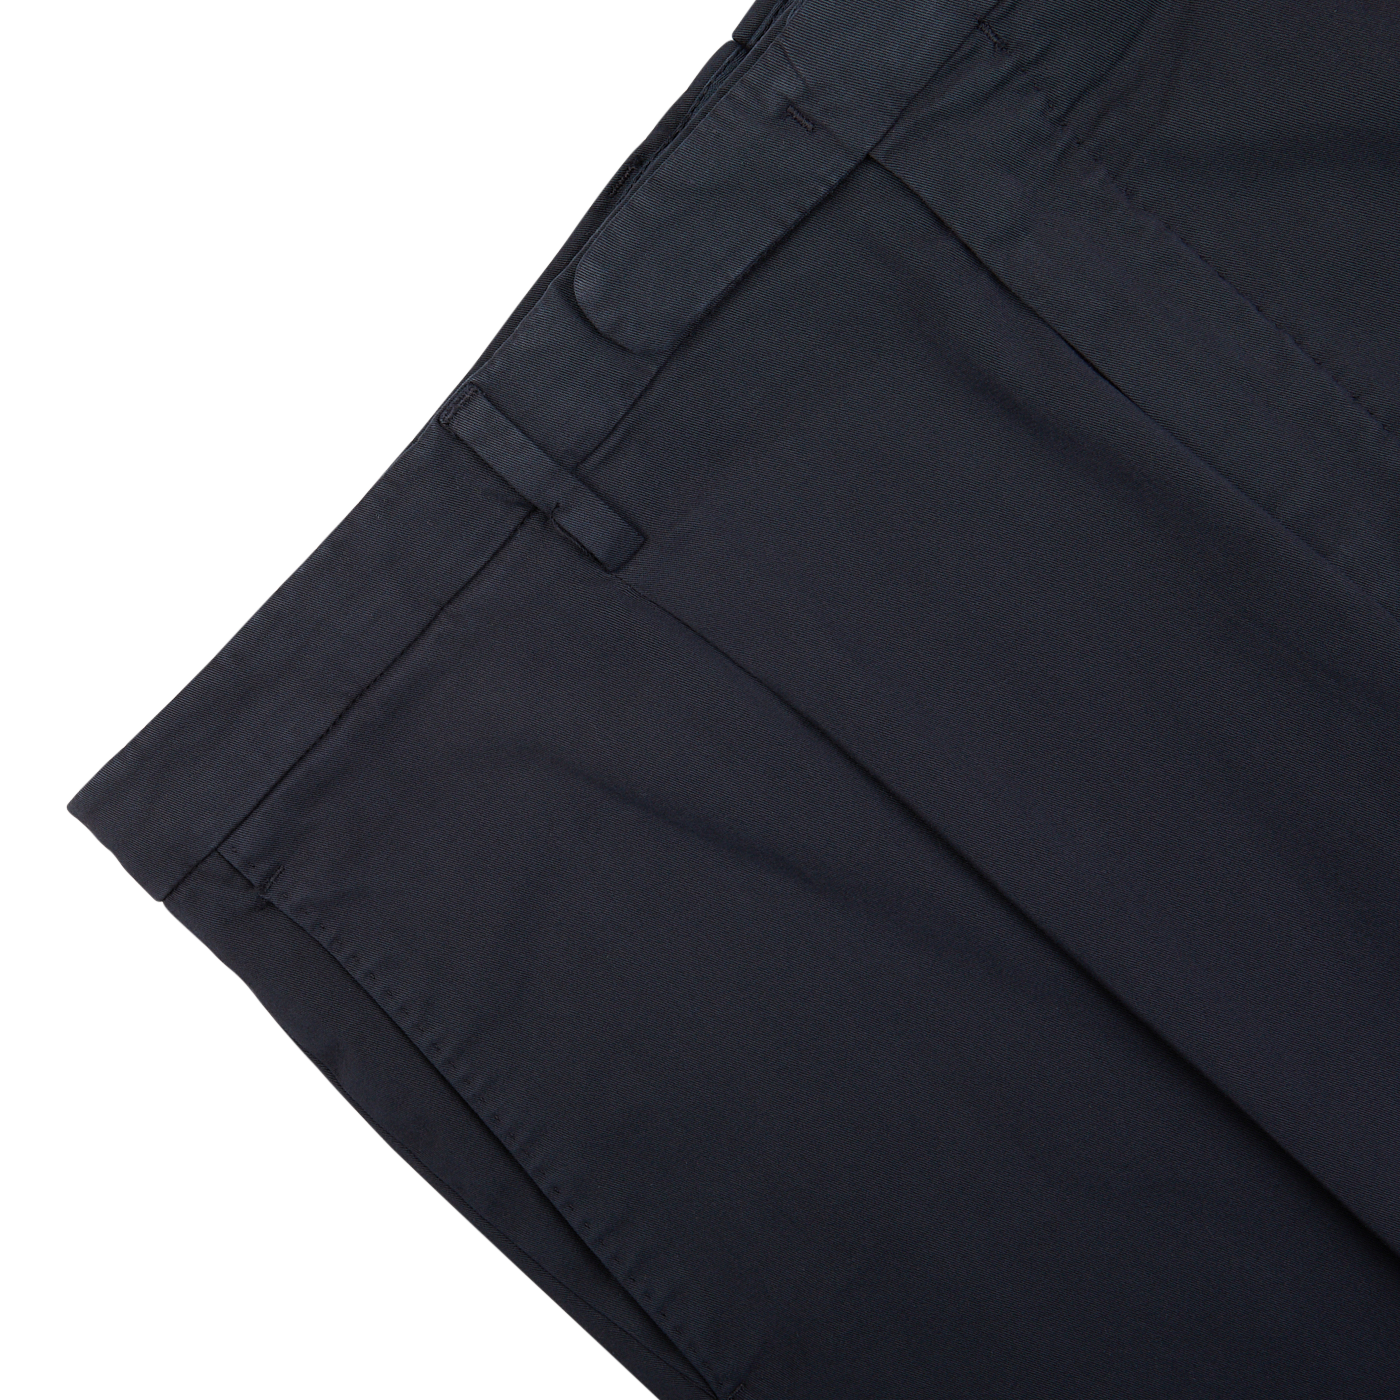 Boglioli Navy Blue Washed Cotton Pleated Trousers on a white background.